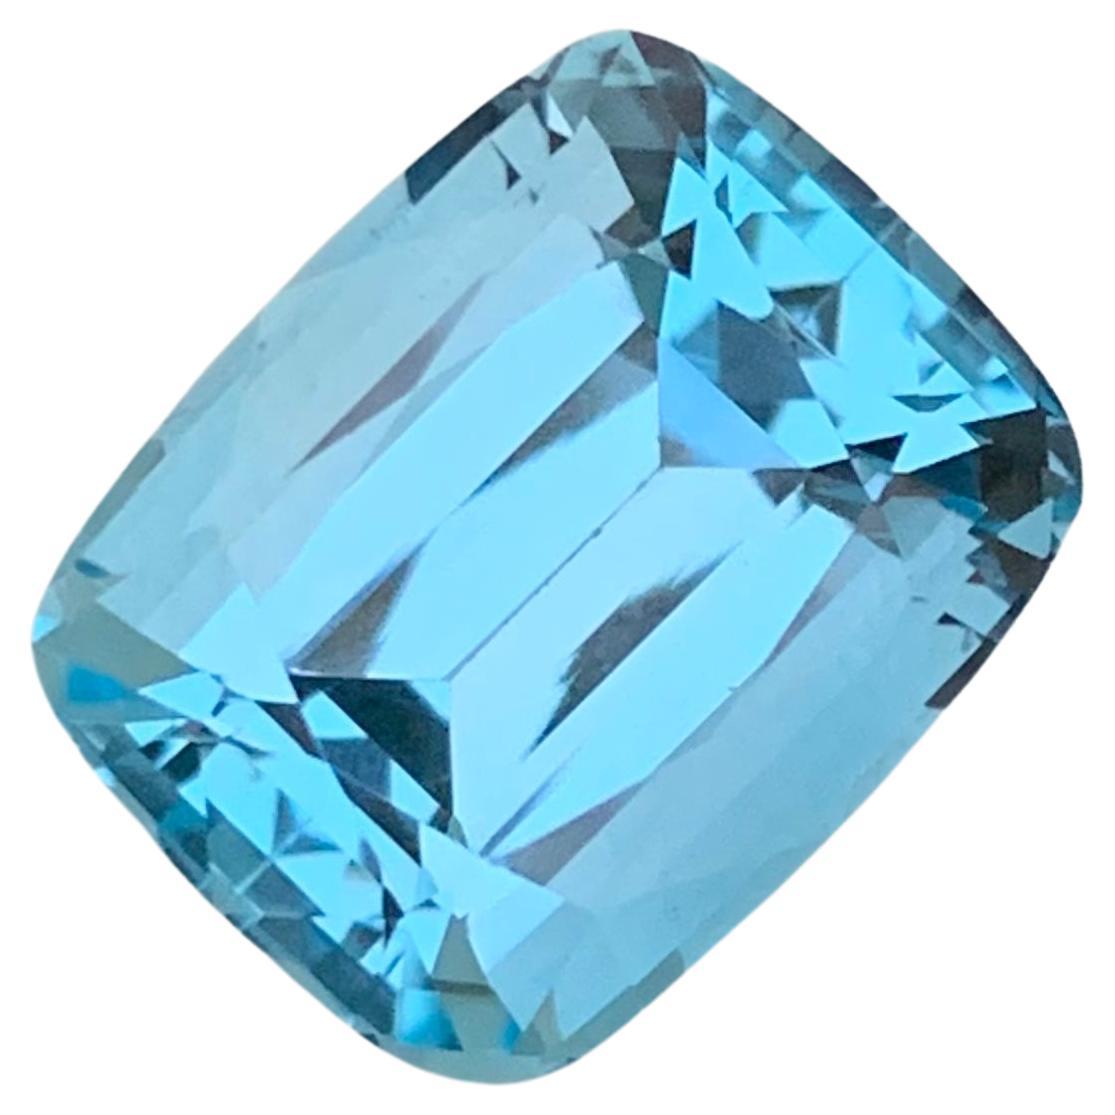 Gorgeous Clean Faceted Sky Blue Topaz 12 Carat From Brazil Mine Cushion Shape  For Sale